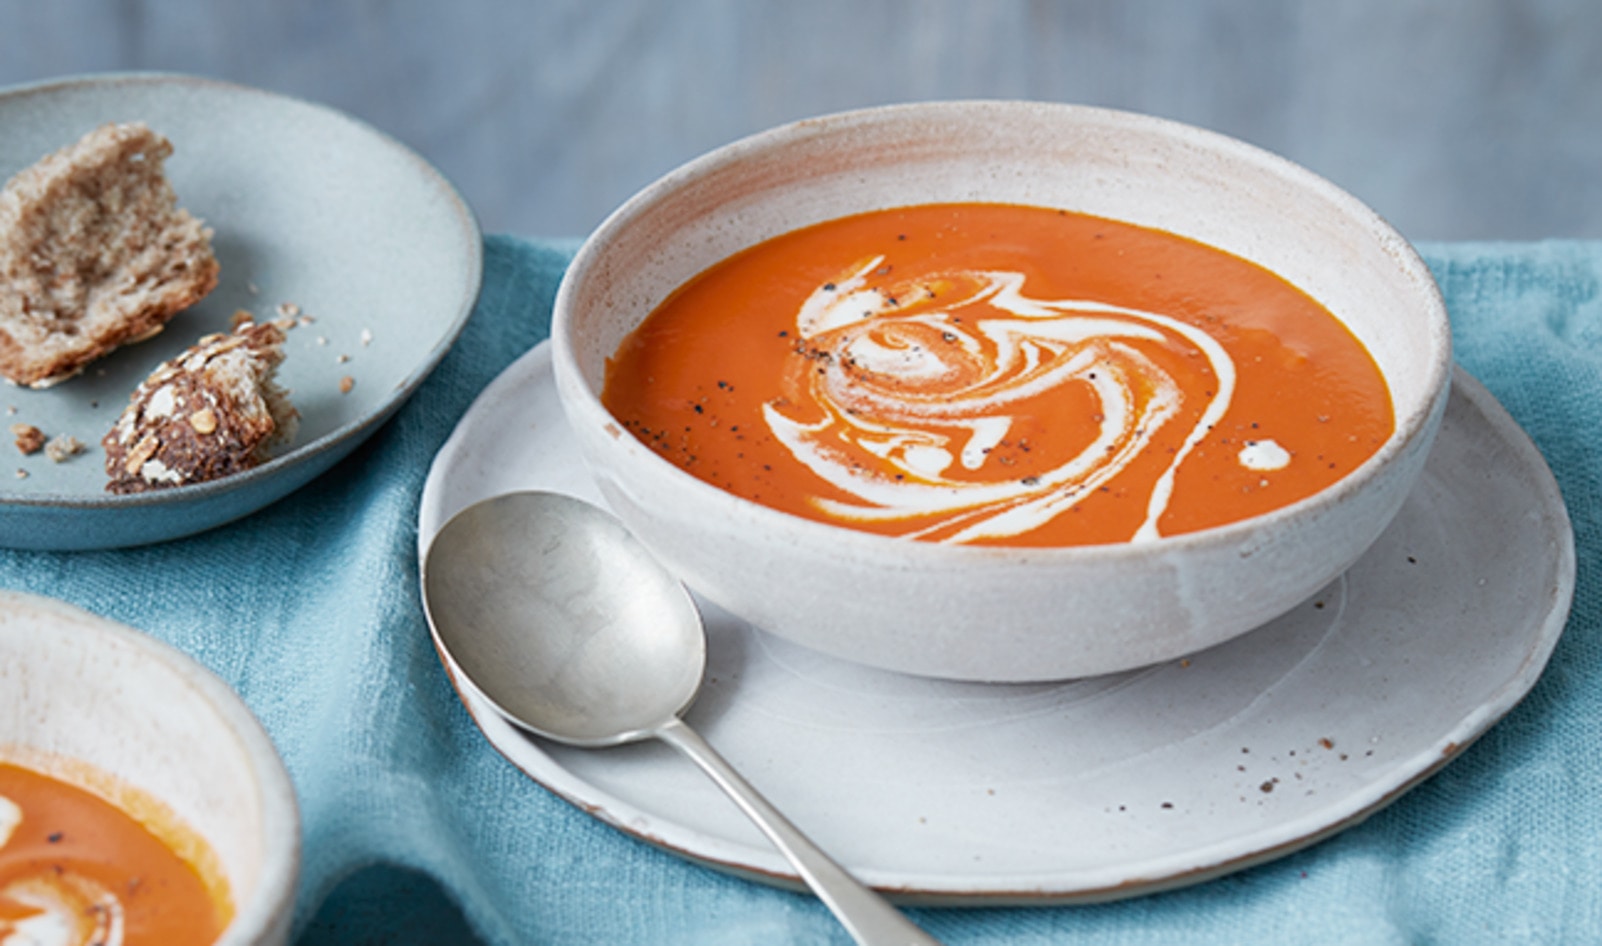 12 Vegan Cozy Soup Recipes: From Tomato to Mexican Pozole